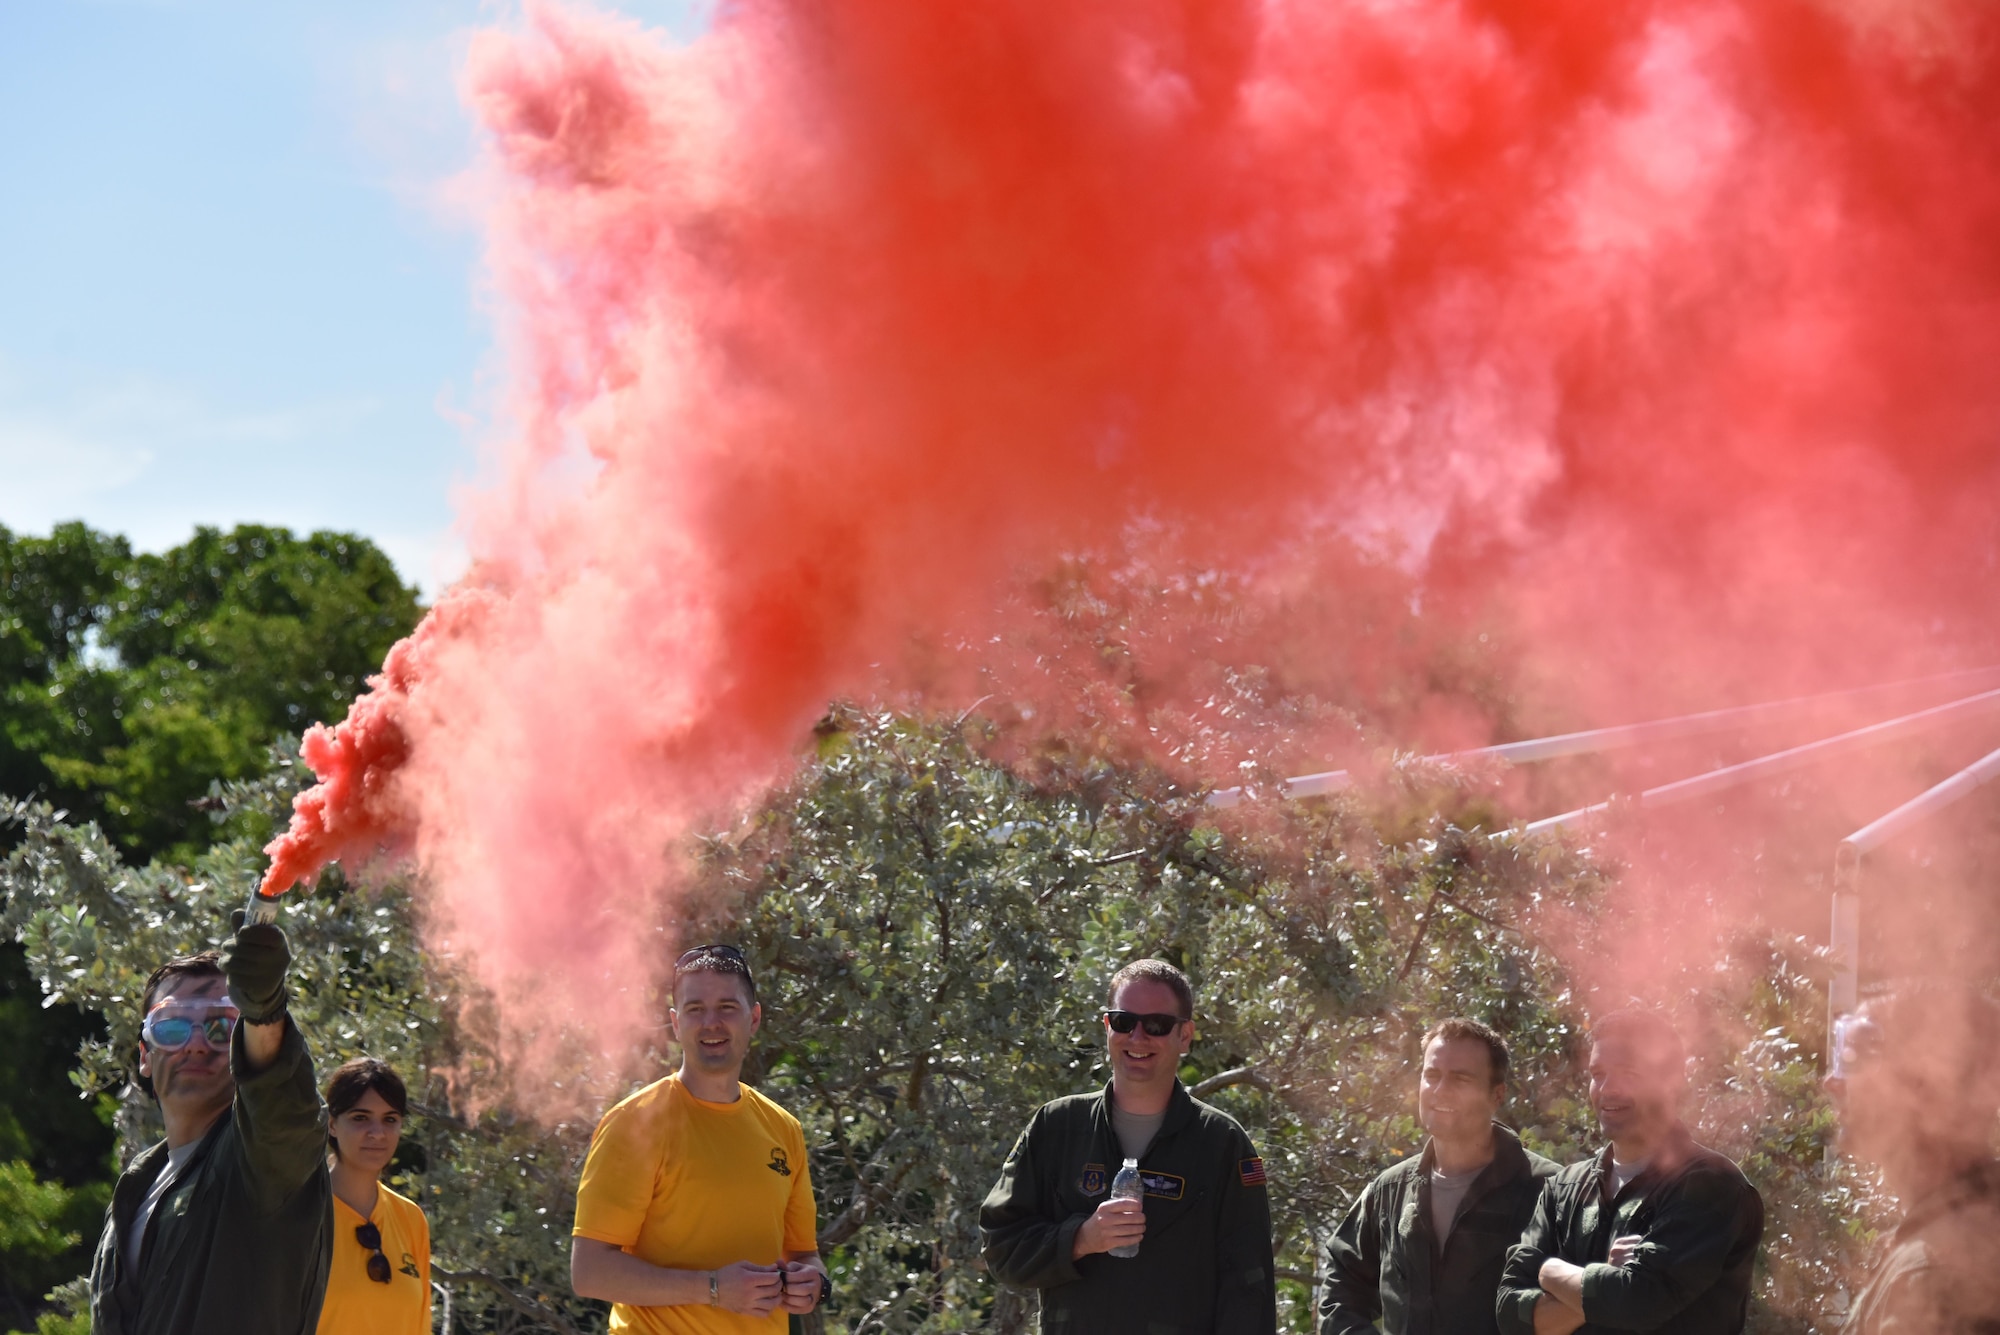 1st Lt. William Kammerer, III., pilot with the 911th Operations Group, demonstrates an orange smoke flare during survival training at Naval Air Station Key West, Florida, August 18, 2016. Airmen were given refresher training on how to use and operate several pieces of equipment, including different types of flares. (U.S. Air Force photo by Staff Sgt. Marjorie A. Bowlden)